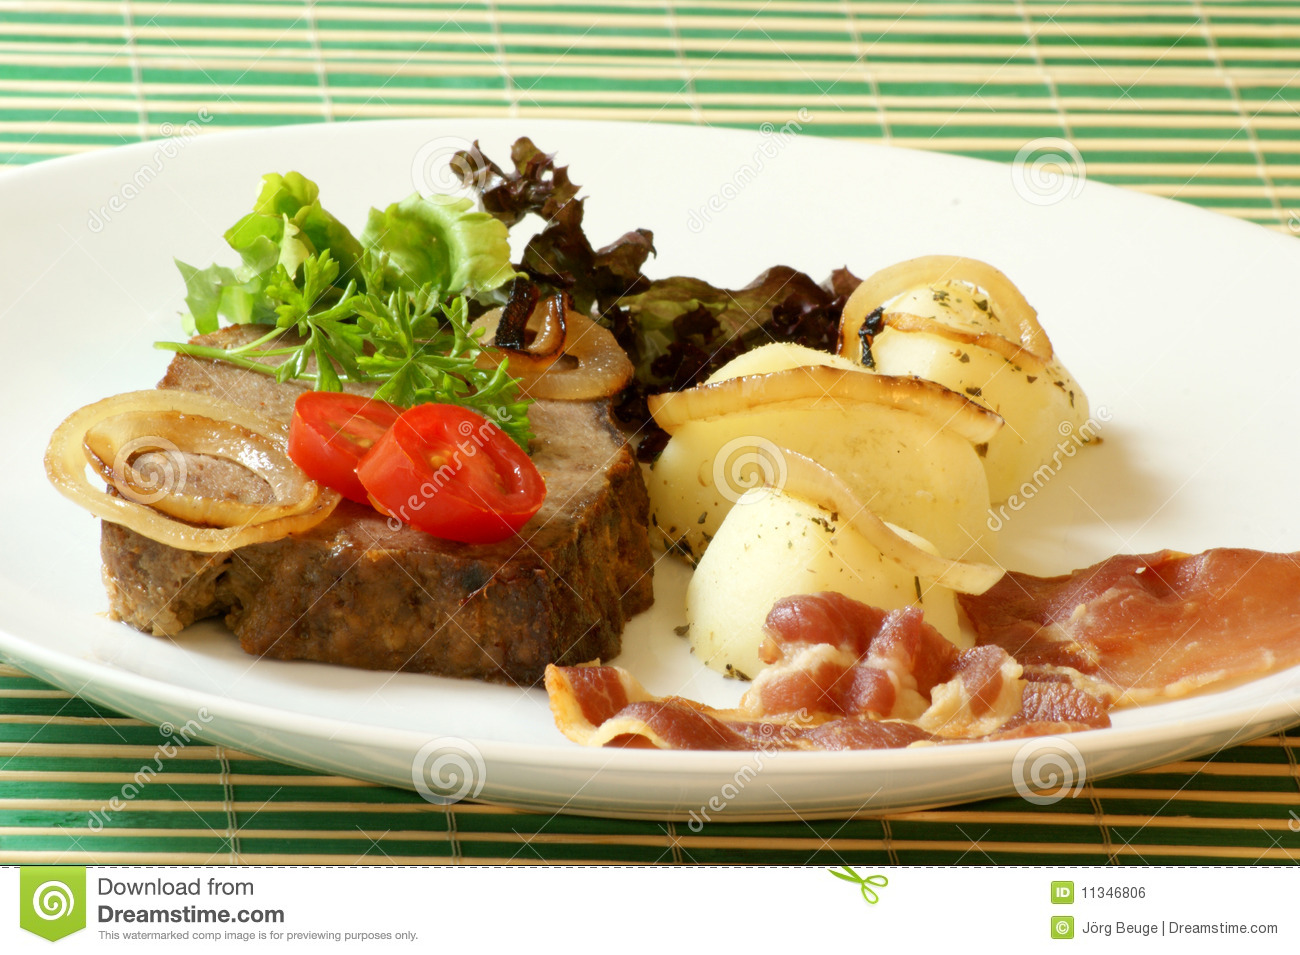 Sliced Meat Loaf With Bacon On A Plate Royalty Free Stock Image